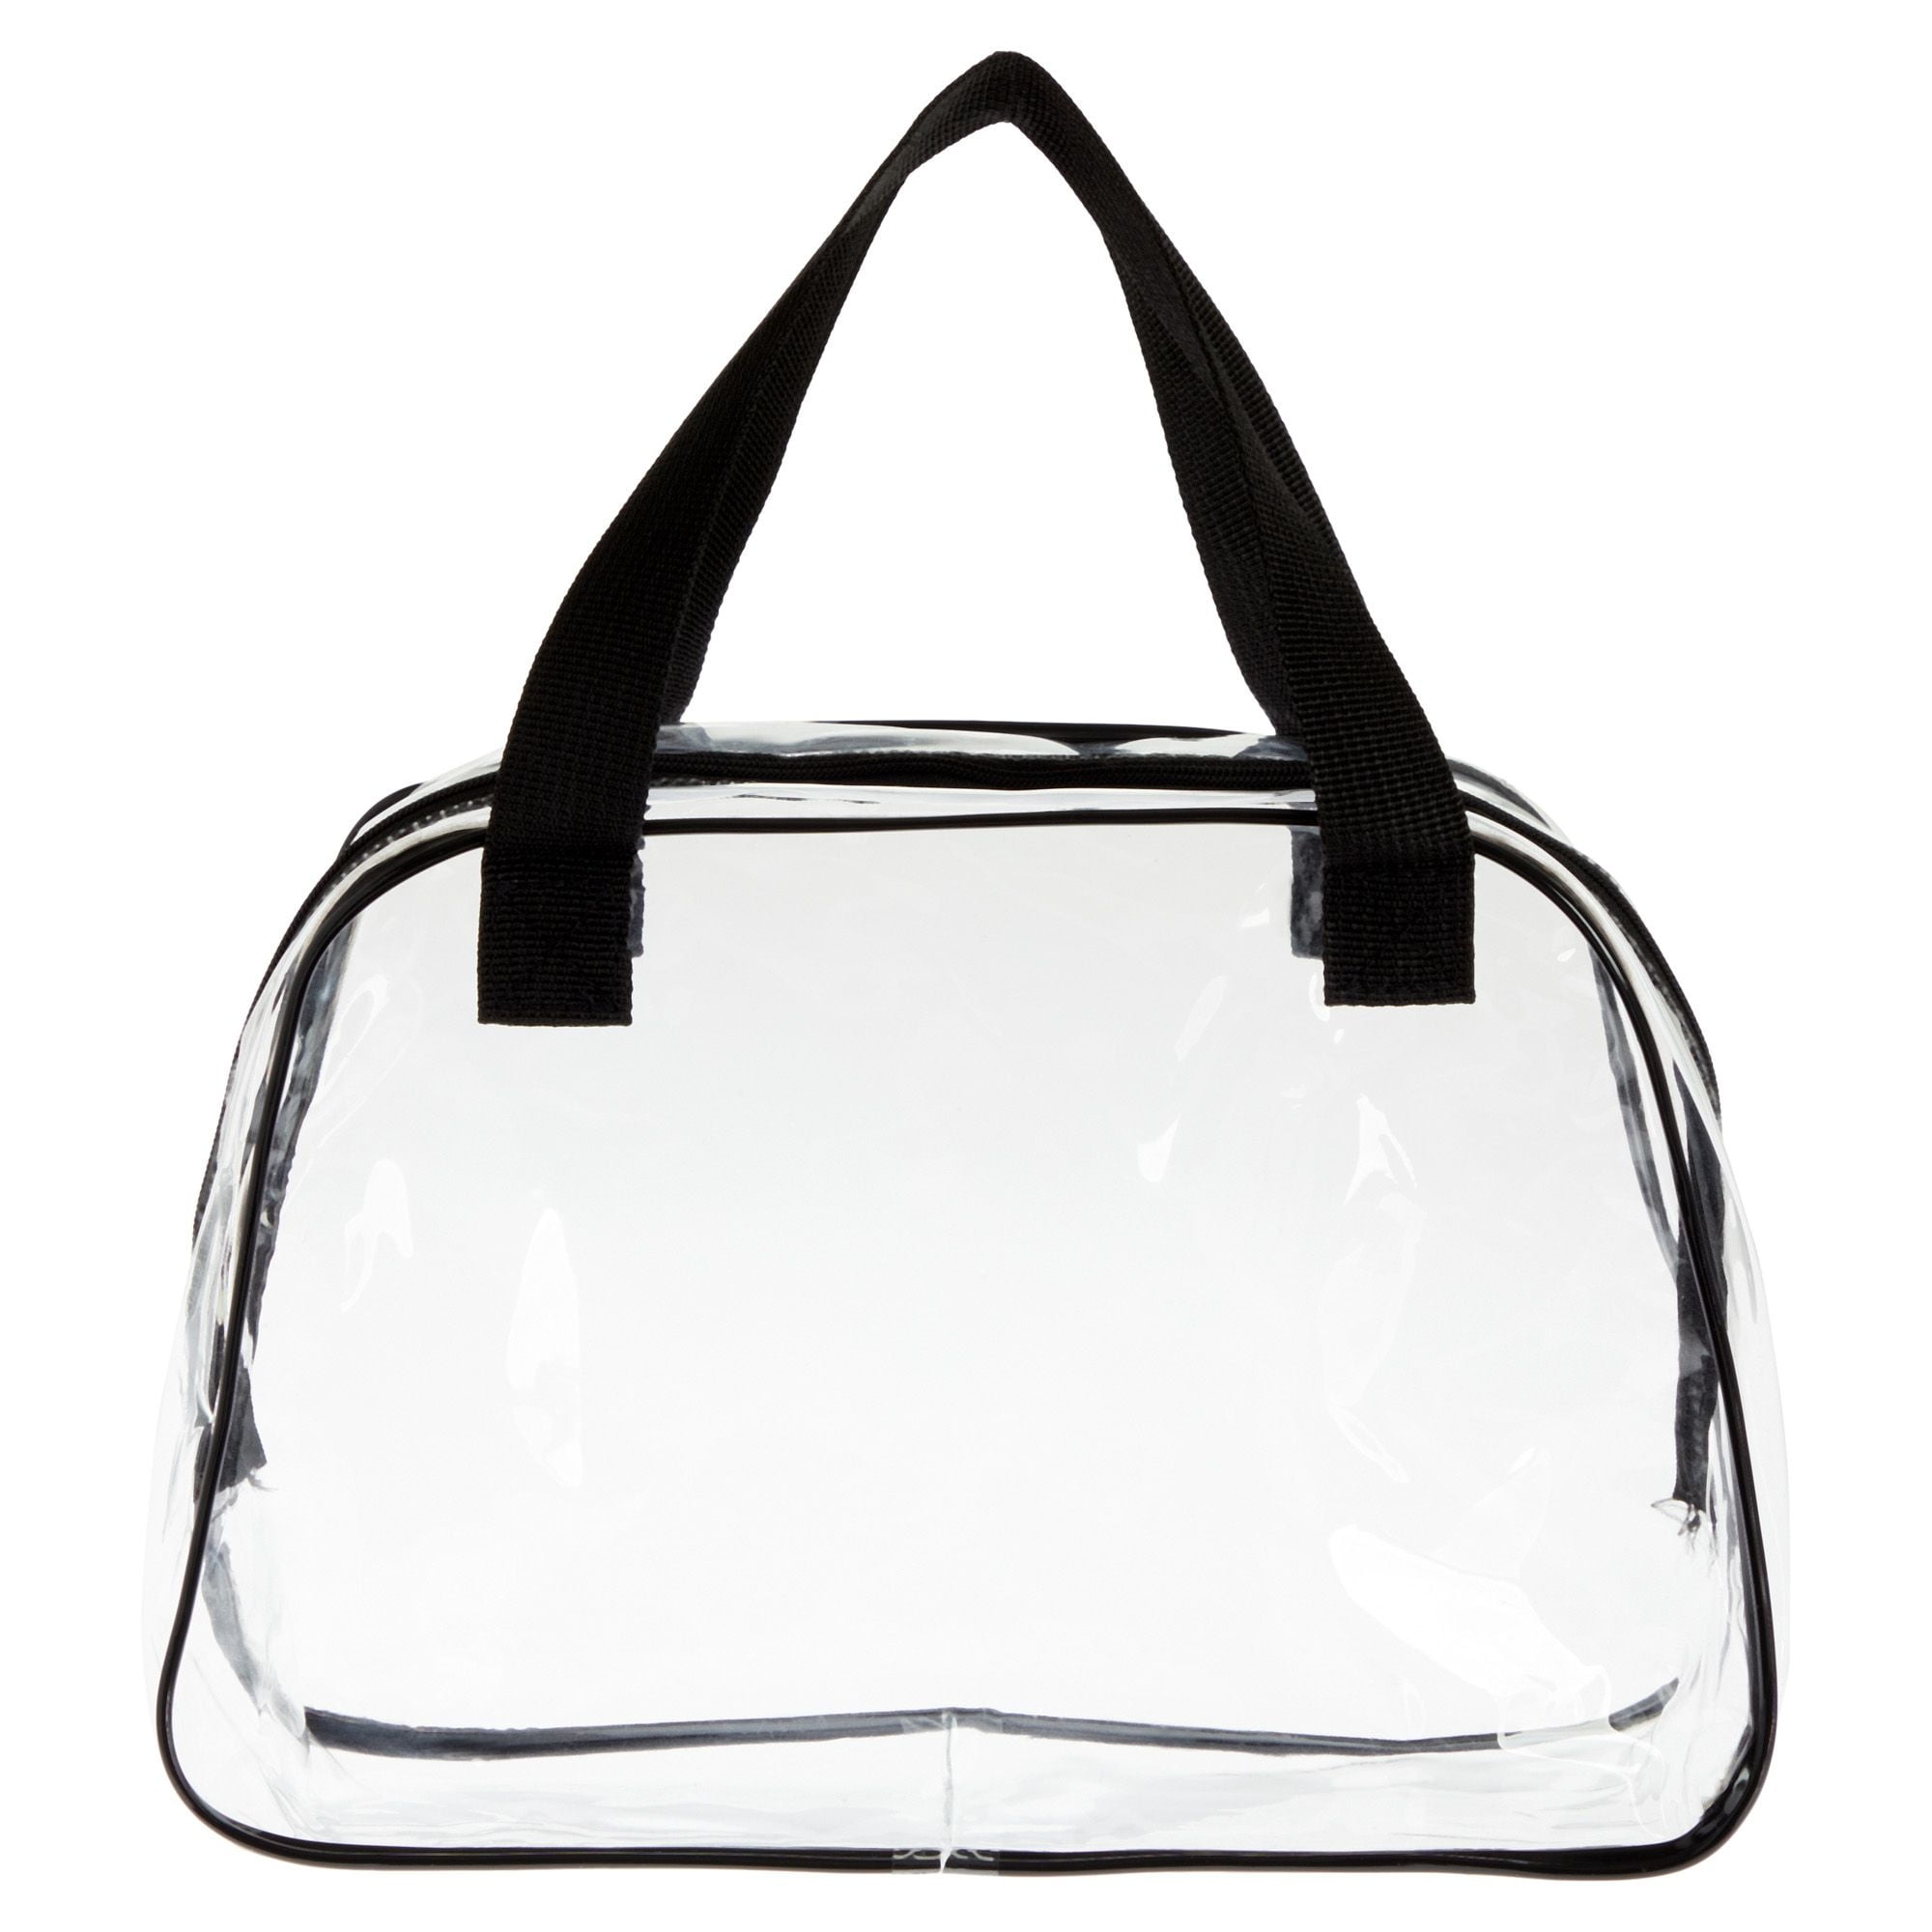 Vorspack Clear Purse Stadium Approved，TPU Clear Bag for Women Men, Clear  Crossbody Bag for Sport Event Concert, White - Walmart.com